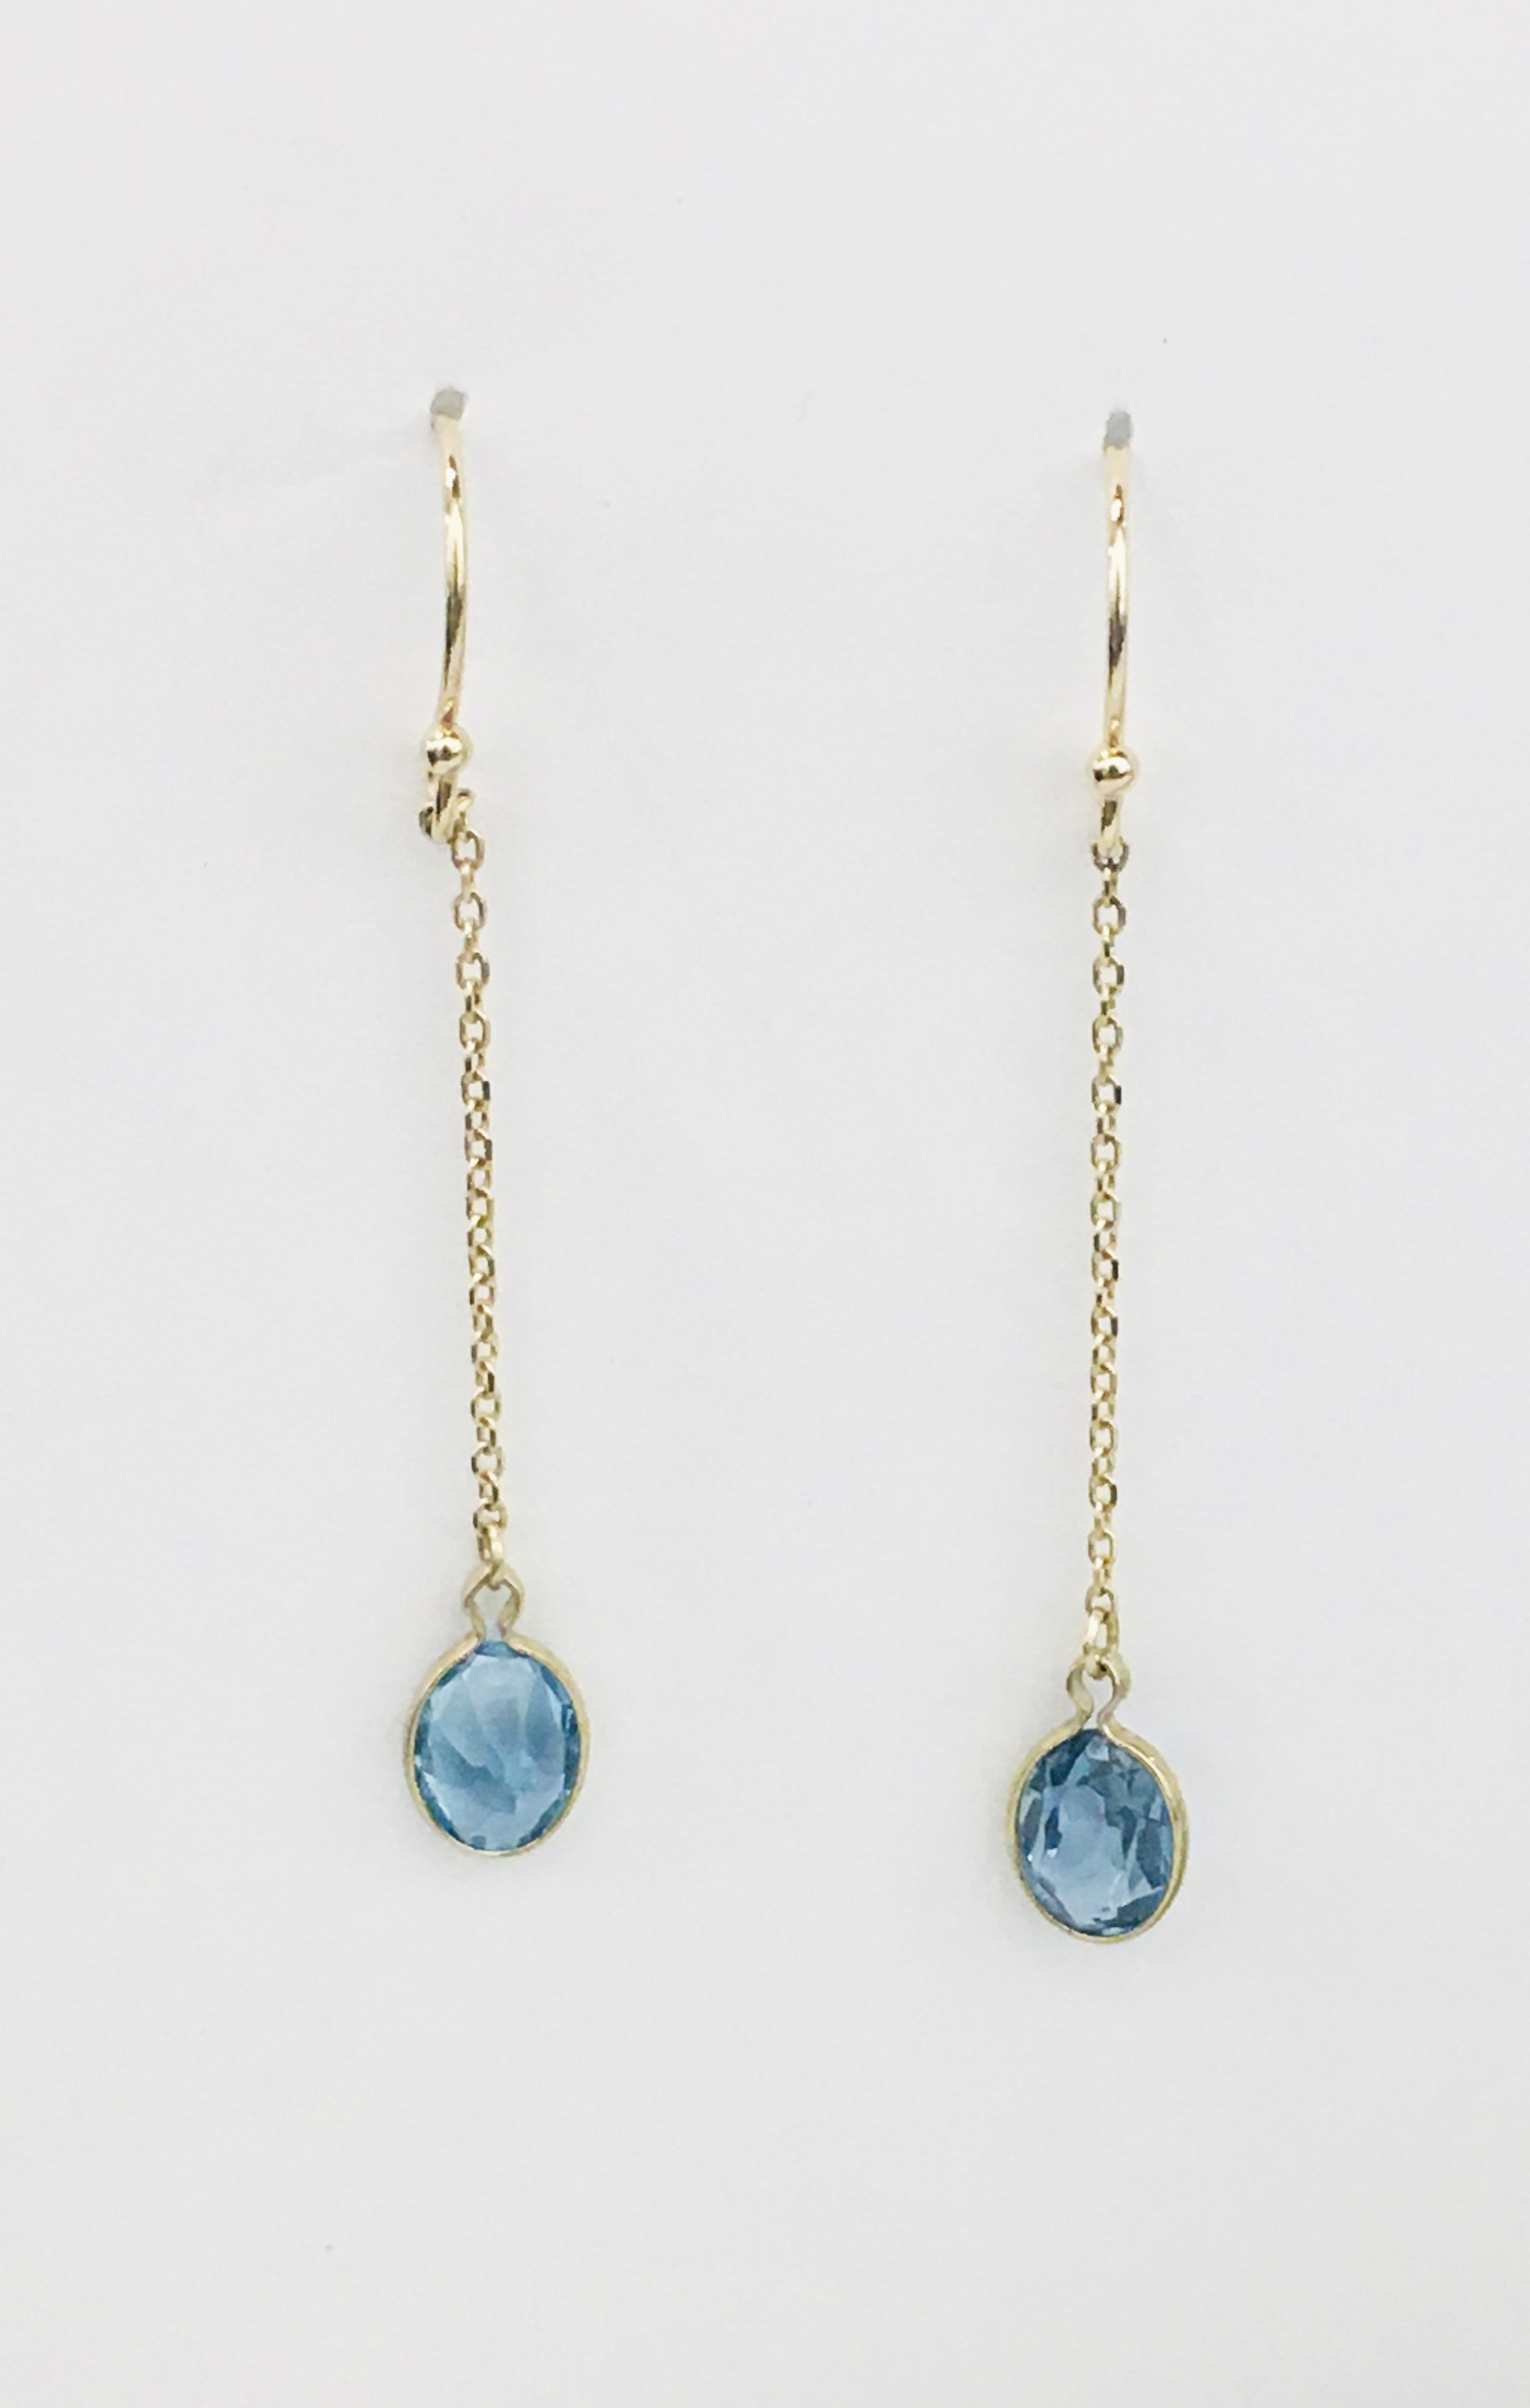 Topaz and Gold Earrings by D'ETTE DELFORGE